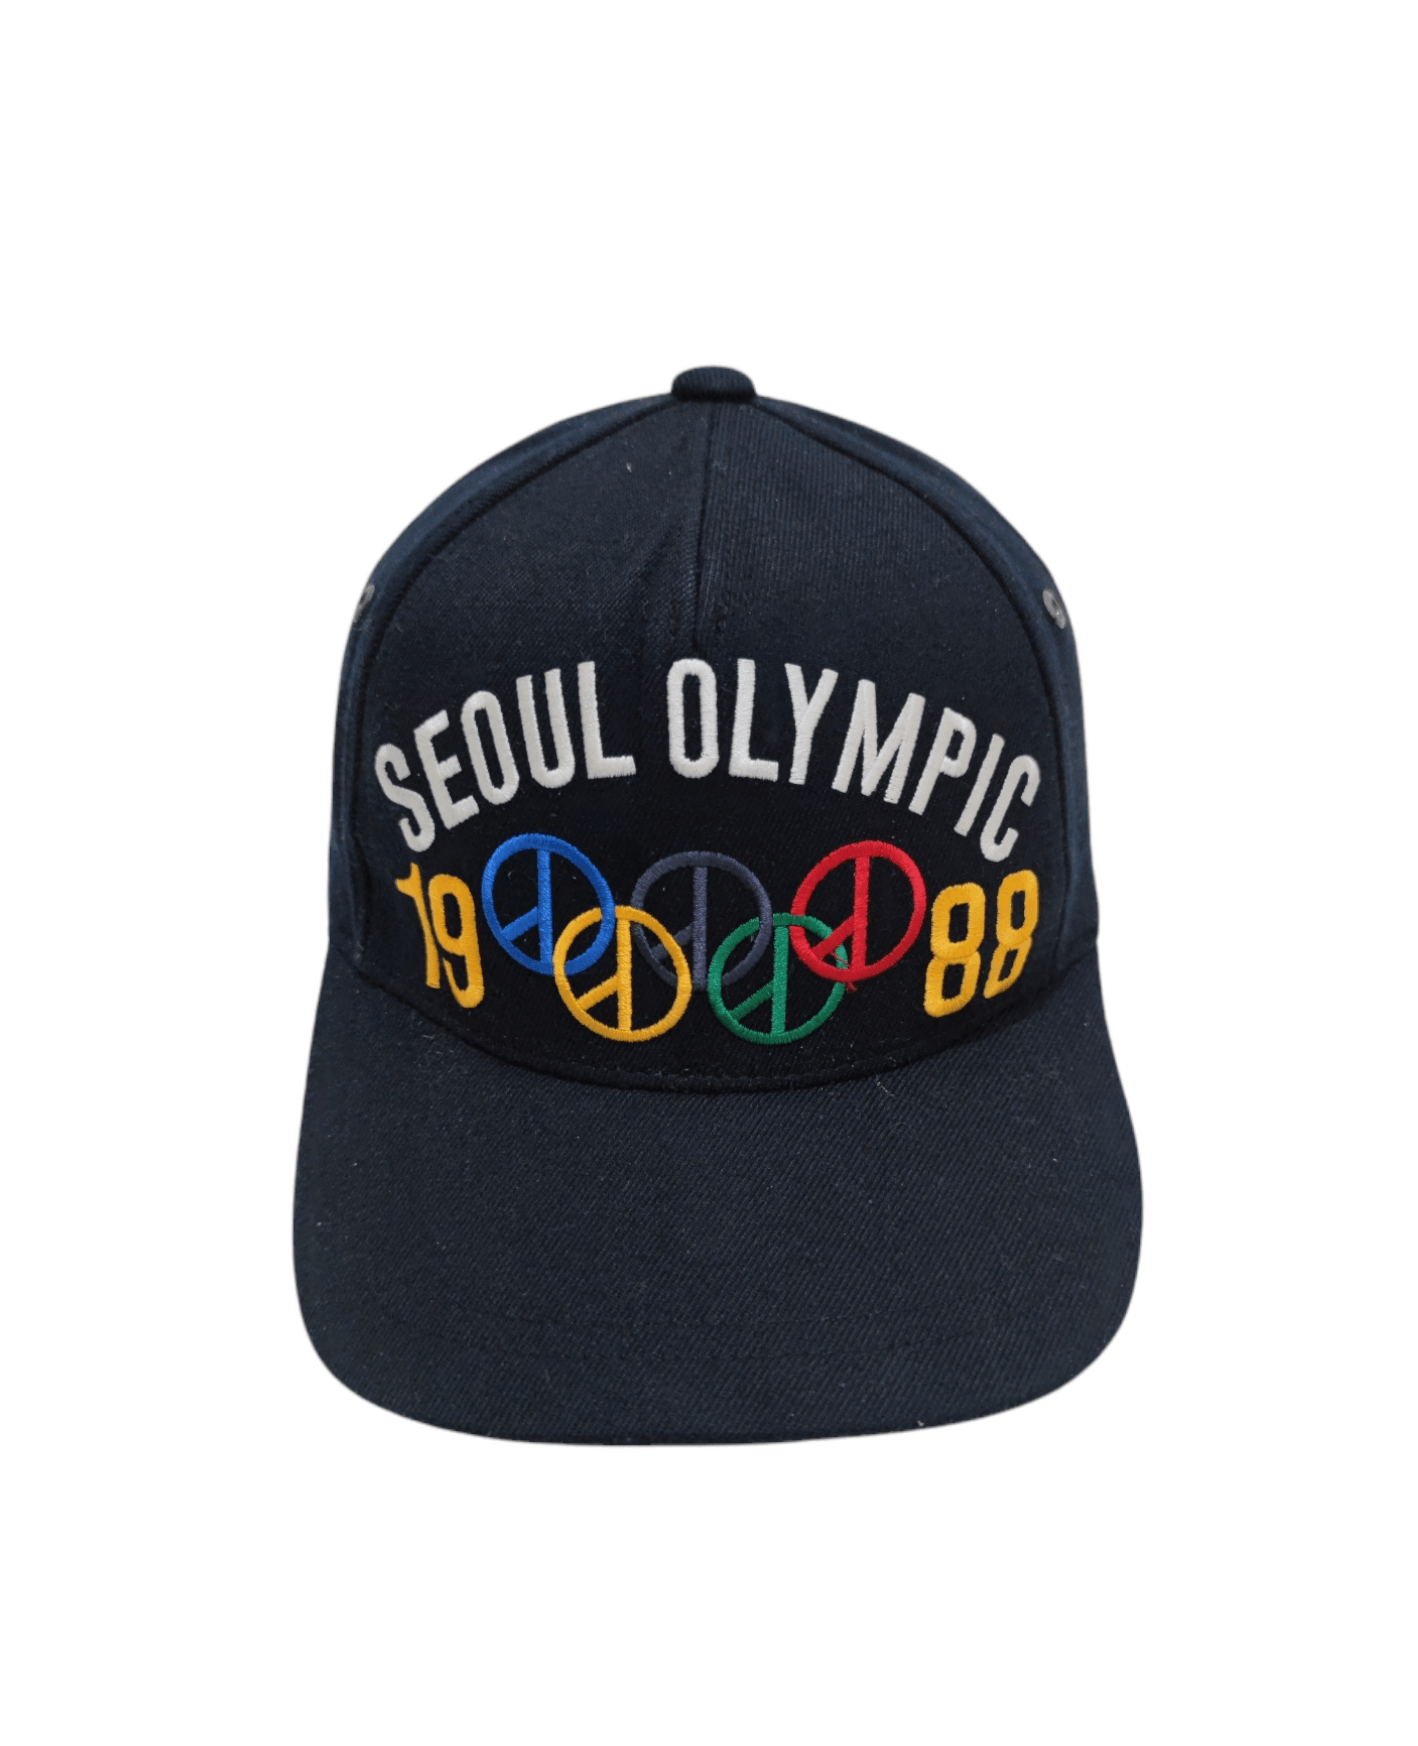 Pre-owned Usa Olympics X Vintage Seoul Olimpic 1988 Hat In Black